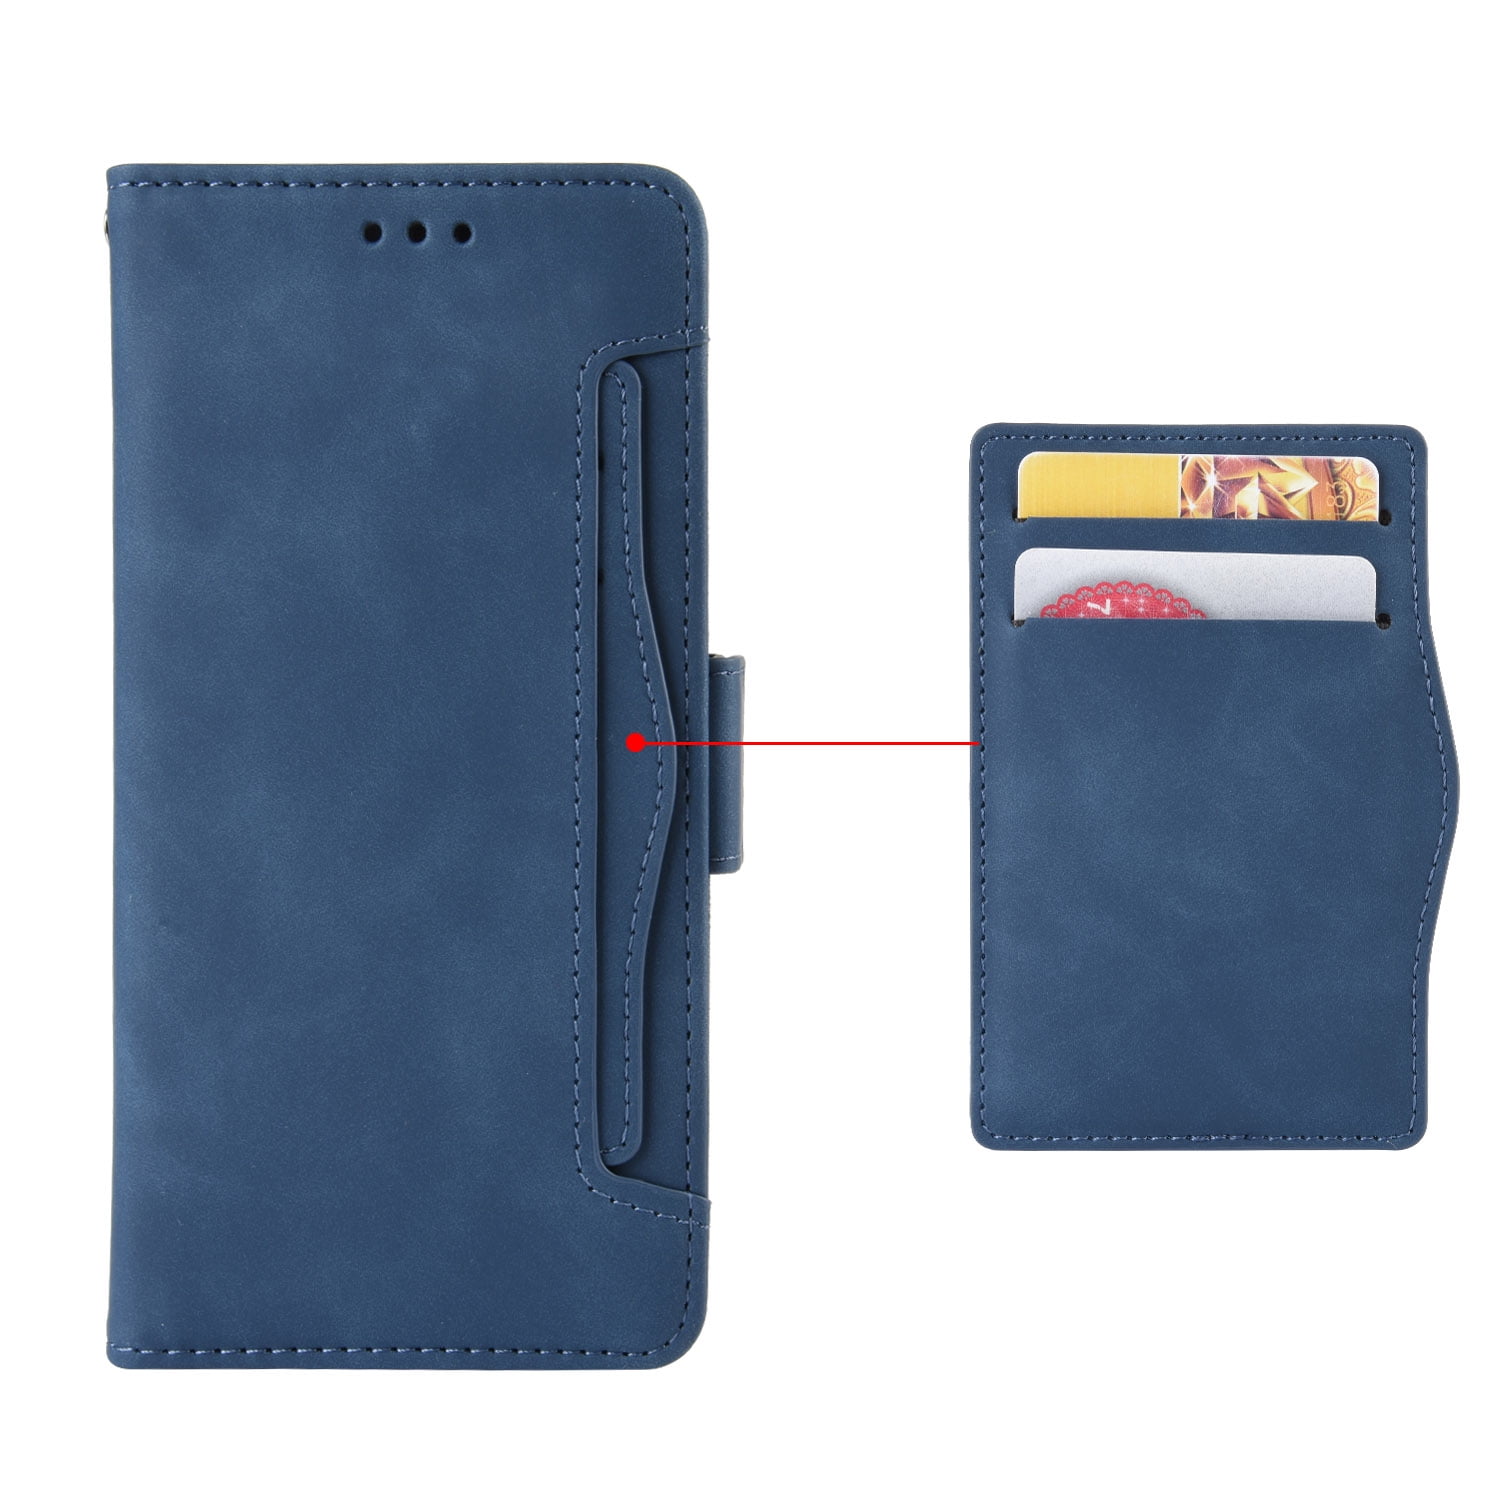  HOUCY Wallet Case for iPhone 14/14 Max/14 Pro/14 Pro Max,  Ultra-Thin Multi-Card Zippered Leather Case, Flip Cover with Card Slot  Bracket Shockproof Protective Case (Color : Blue, Size : 14 Pro